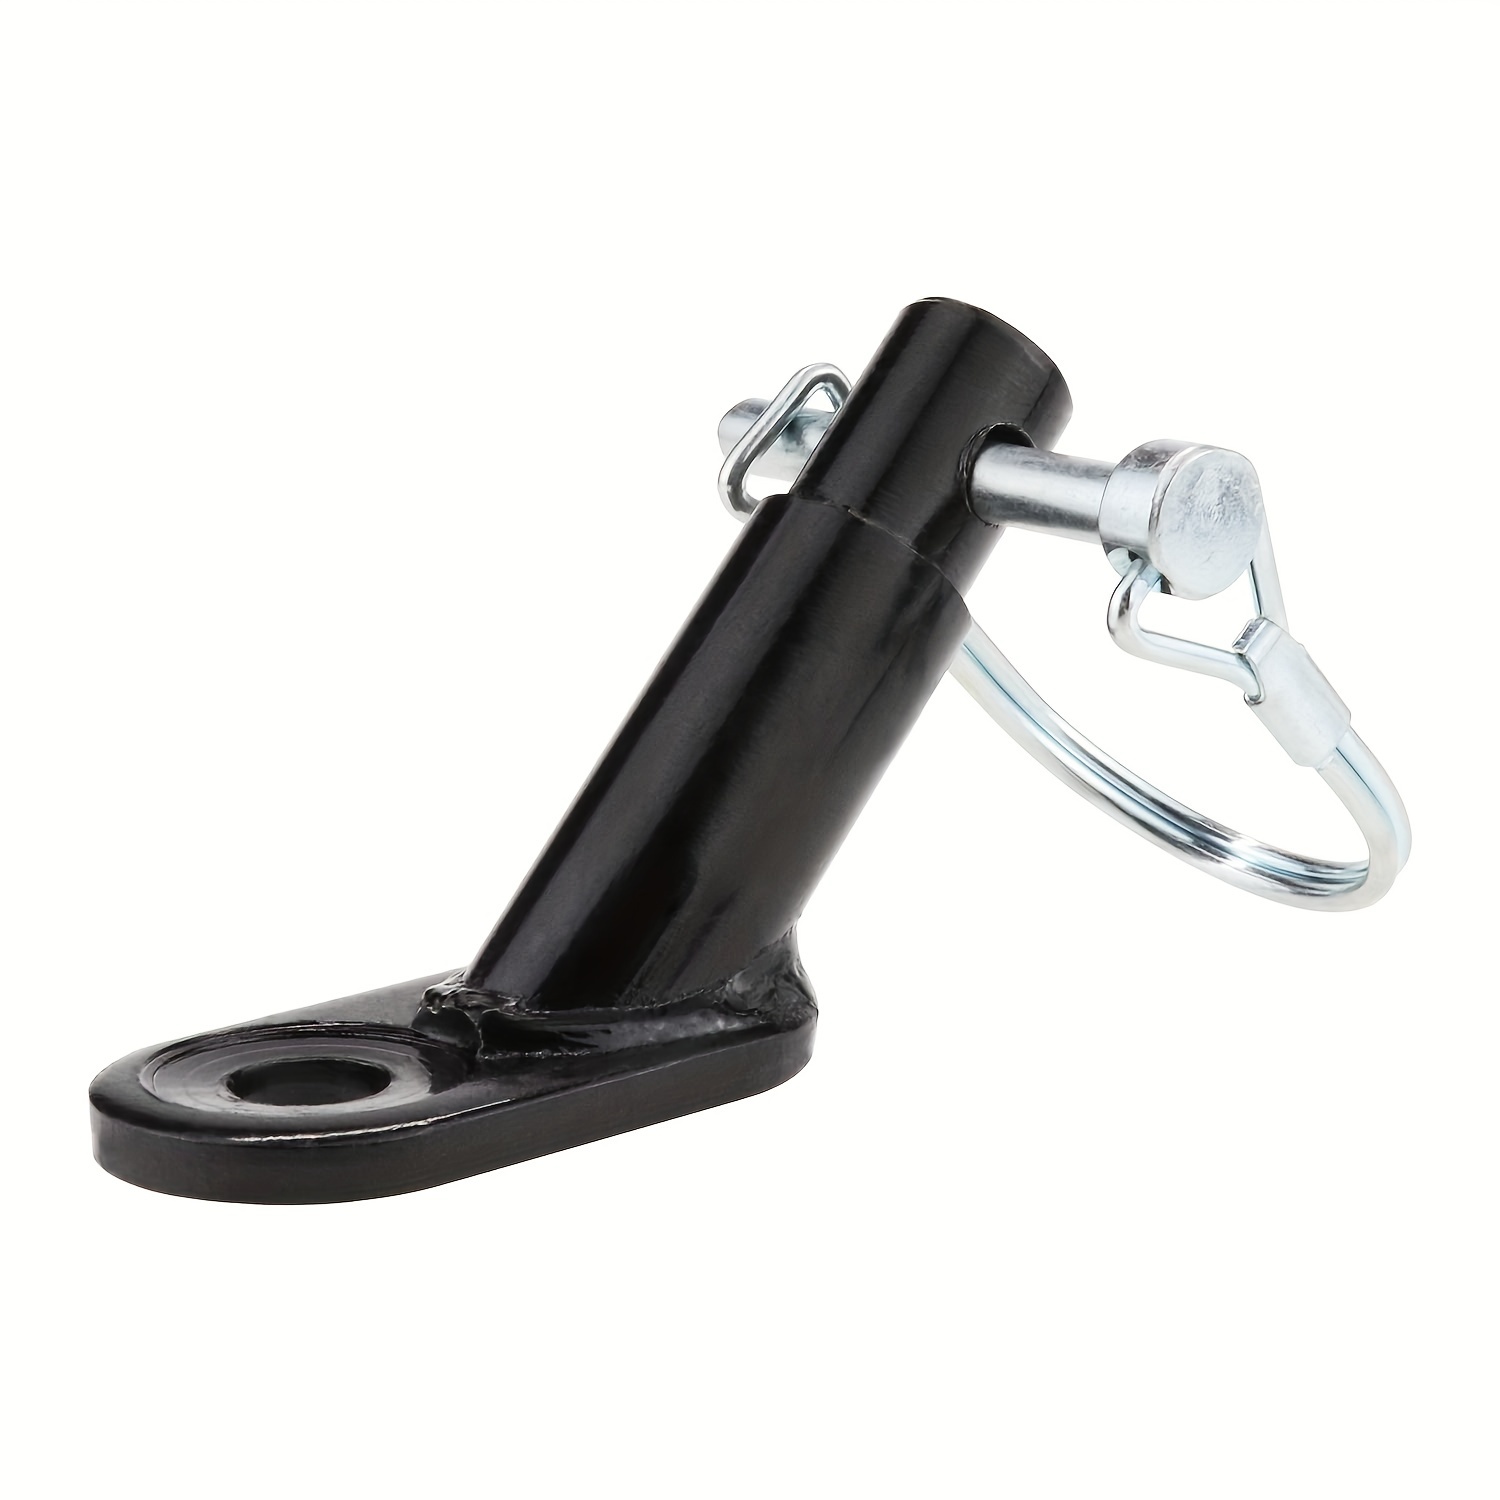 Pet Trailer Hitch Coupler for Bicycle Stroller - Easy Traction Head  Attachment for Convenient Pet Transport